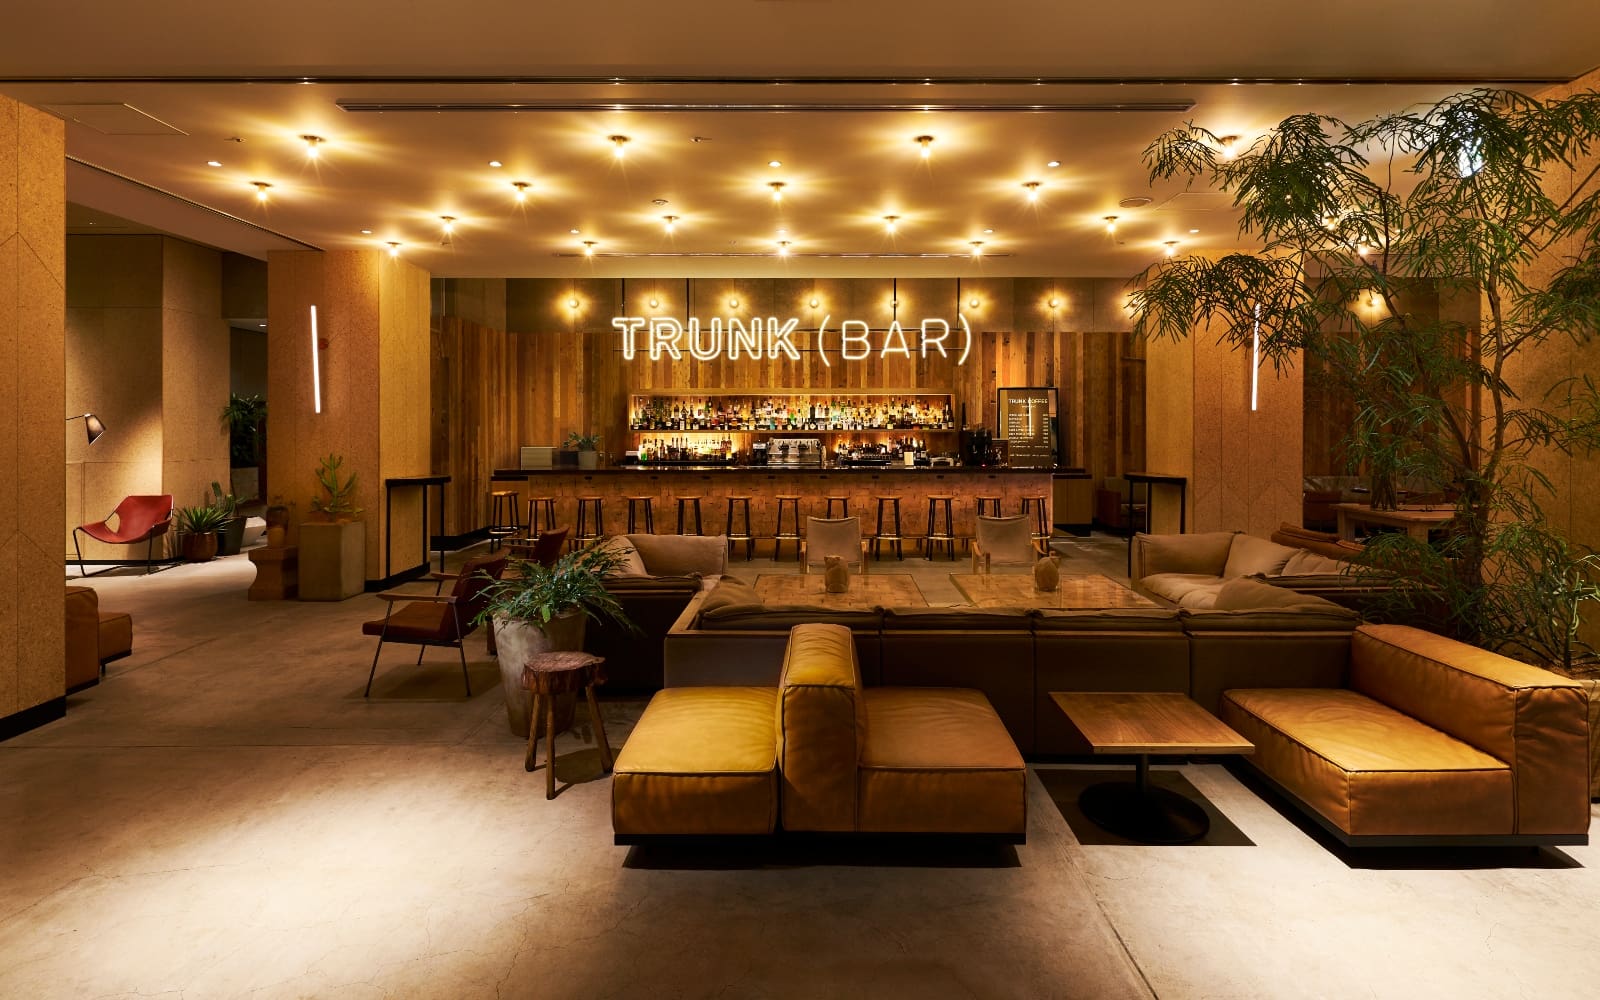 Hotels and digital nomads | The communal bar area at Shibuya Trunk hotel Tokyo, with low wooden furniture, mustard-yellow leather sofas and oriental-inspired greenery, in front of the long bar